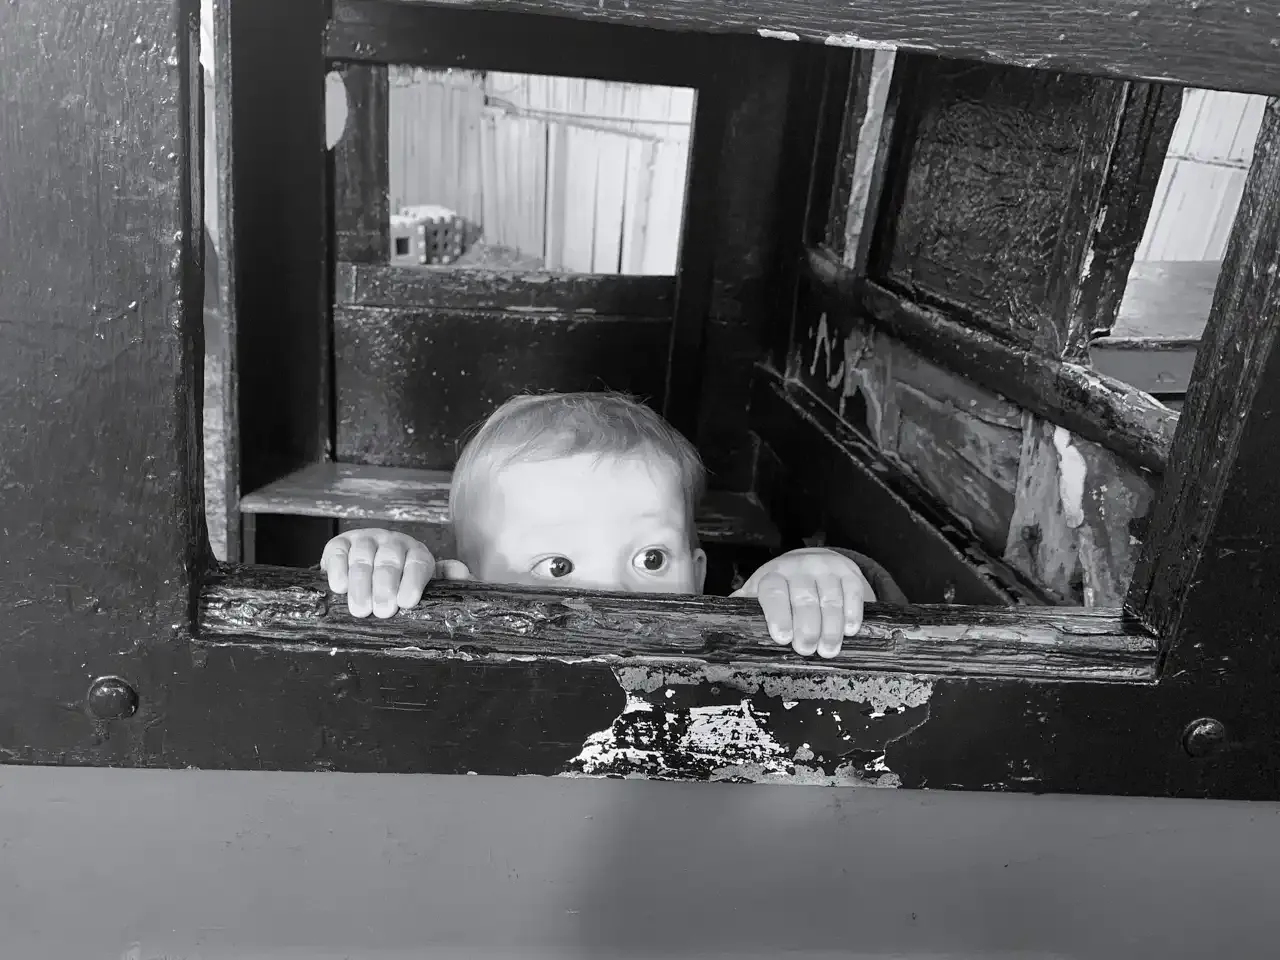 a small child's fingers and eyes peeking out from a ramshackle window